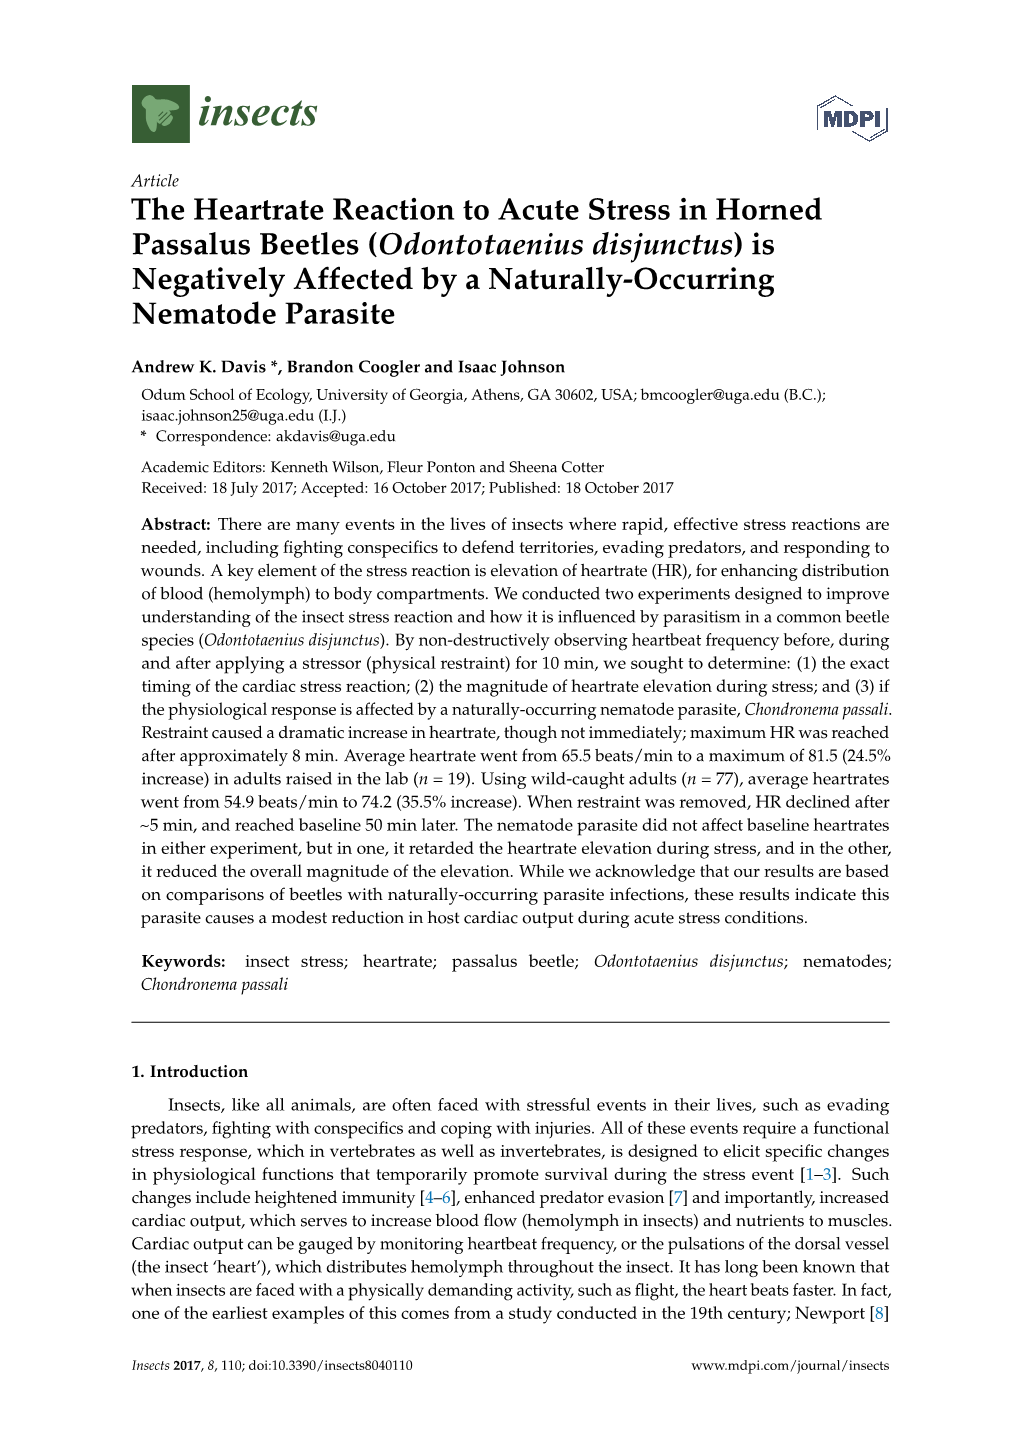 Odontotaenius Disjunctus) Is Negatively Affected by a Naturally-Occurring Nematode Parasite